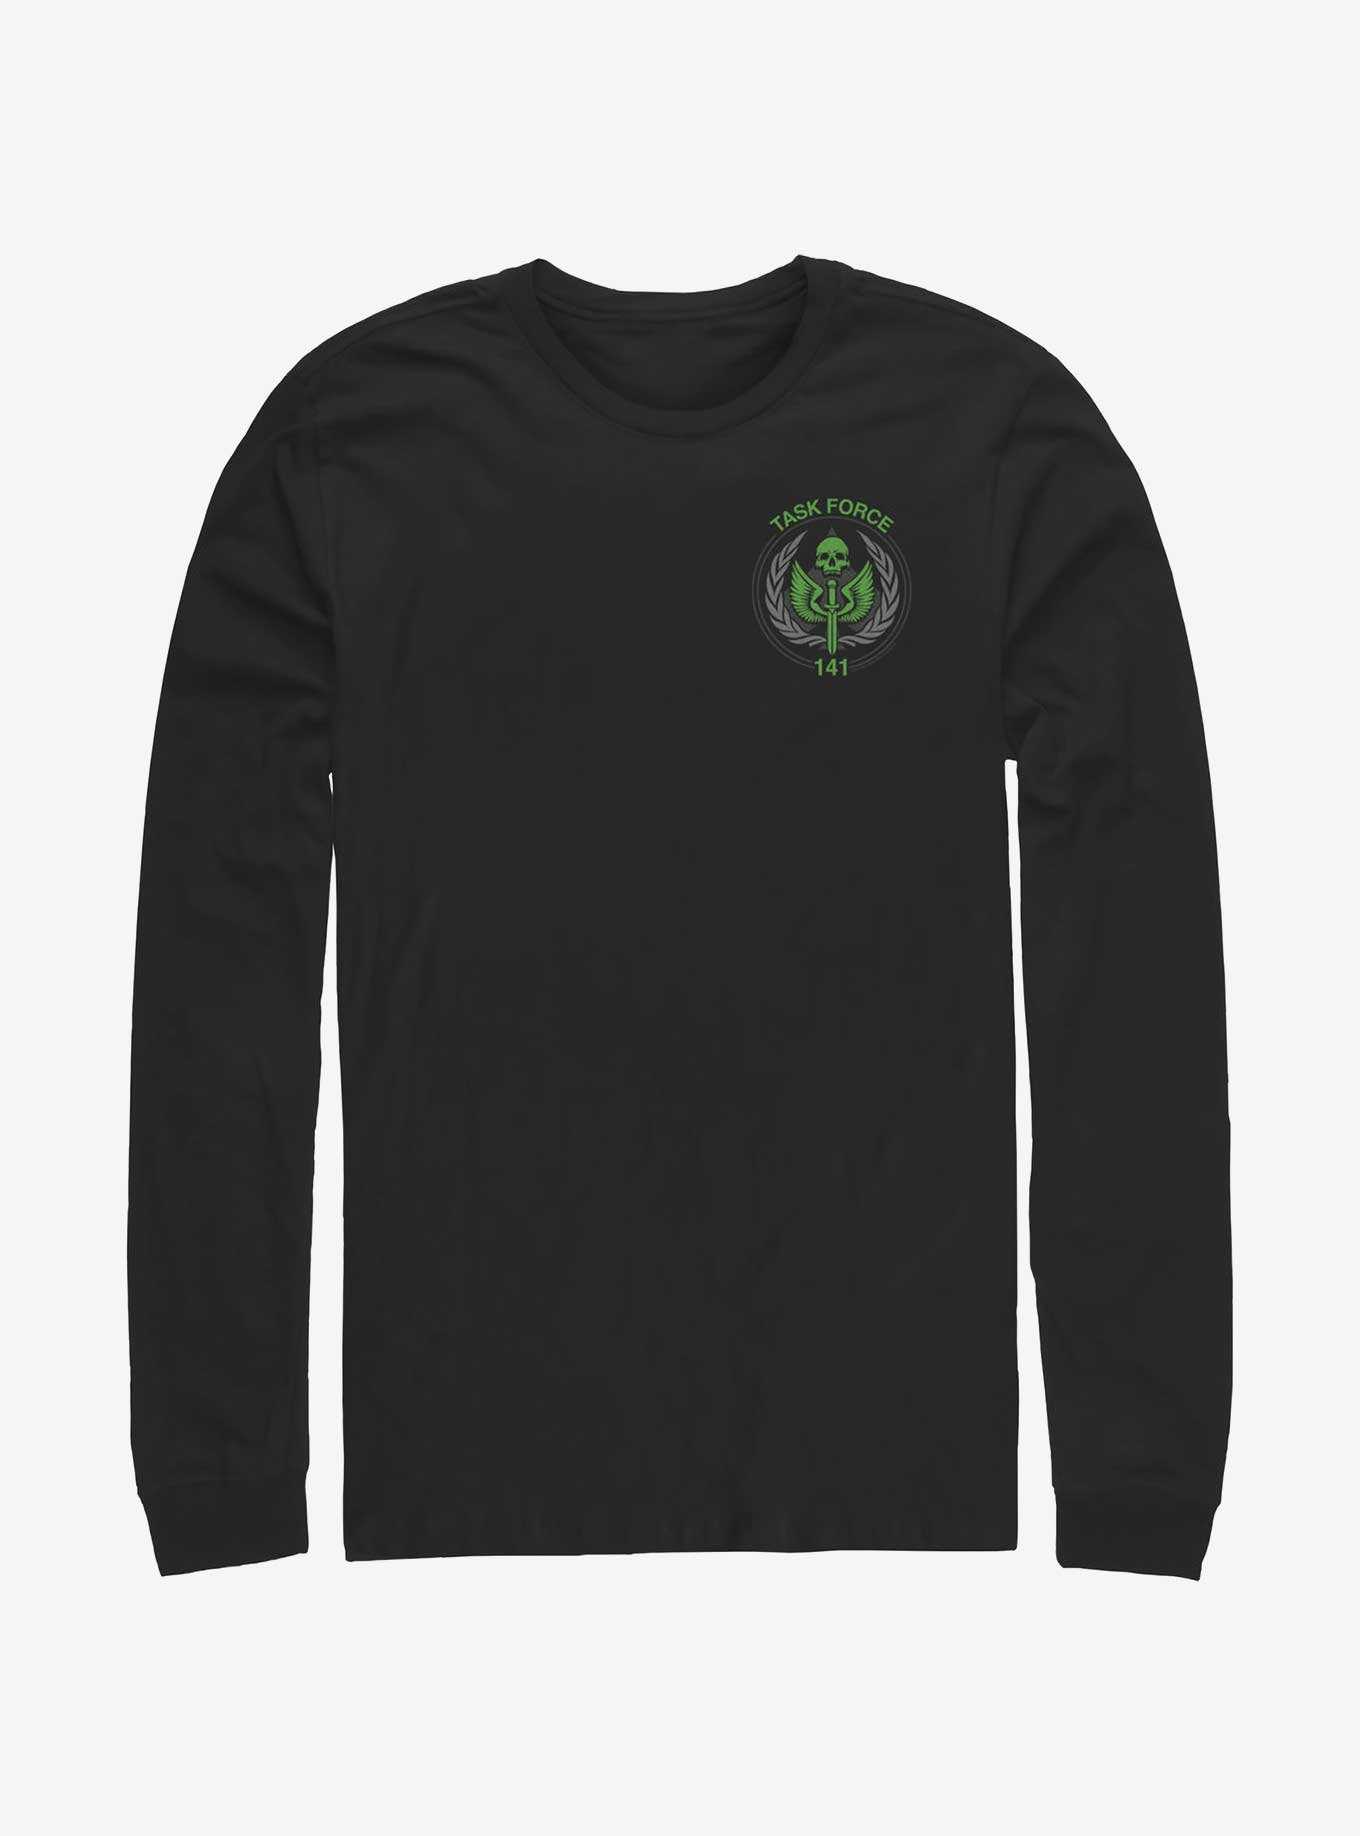 Call of Duty Task Force 141 Patch Long-Sleeve T-Shirt, , hi-res